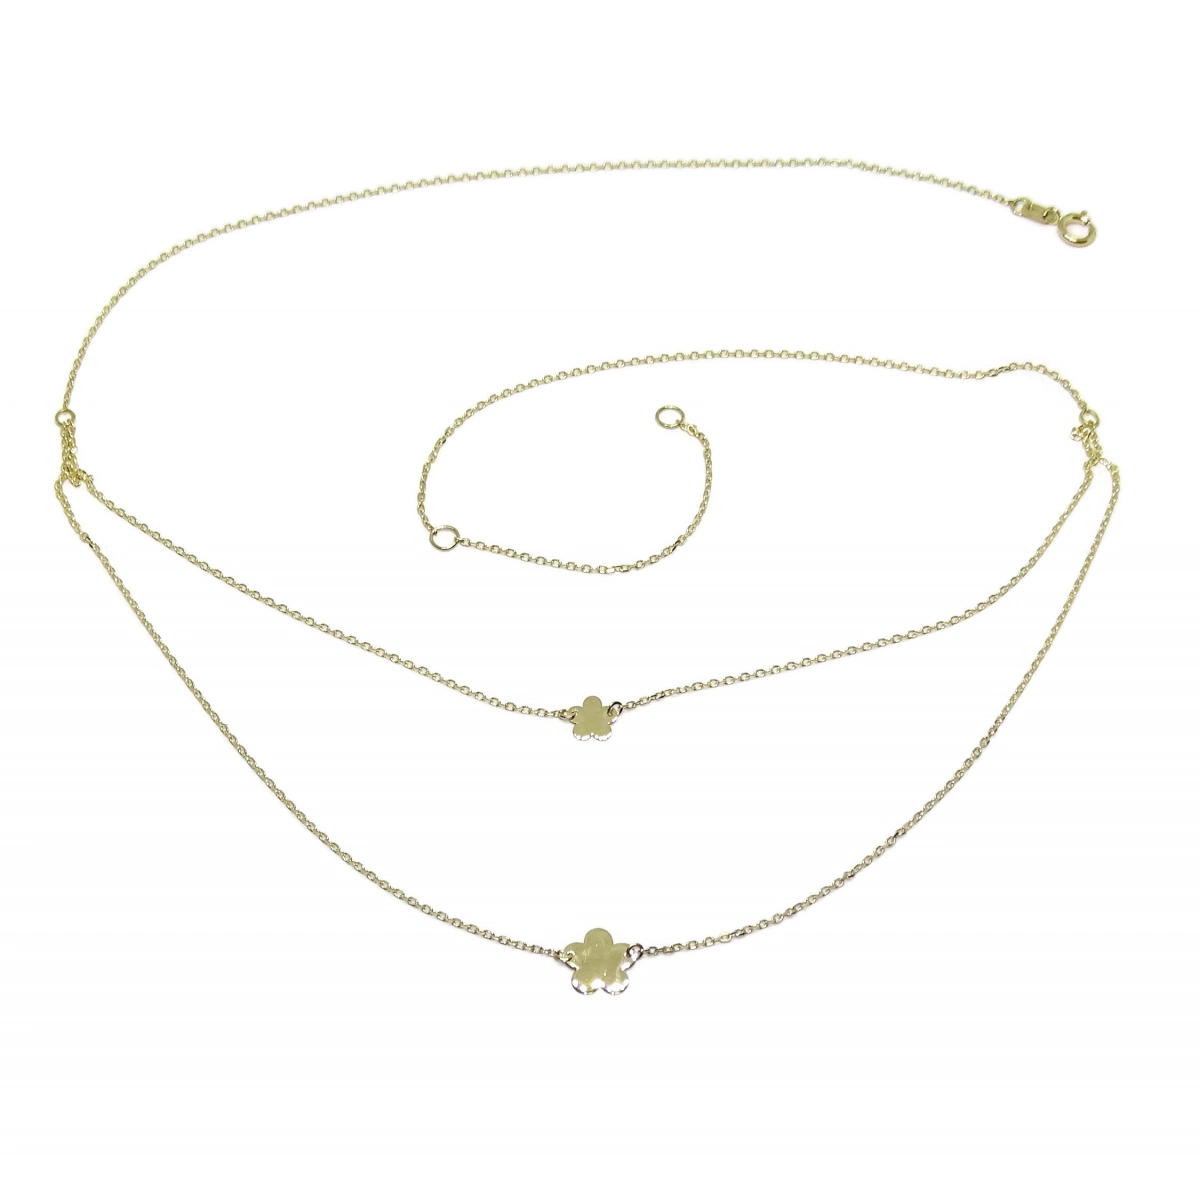 MODERN DOUBLE COLLAR IN 18K YELLOW GOLD WITH CHAIN MINI FORCED AND 2 FLOWERS OF 5 P�TALOS NEVER SAY NEVER